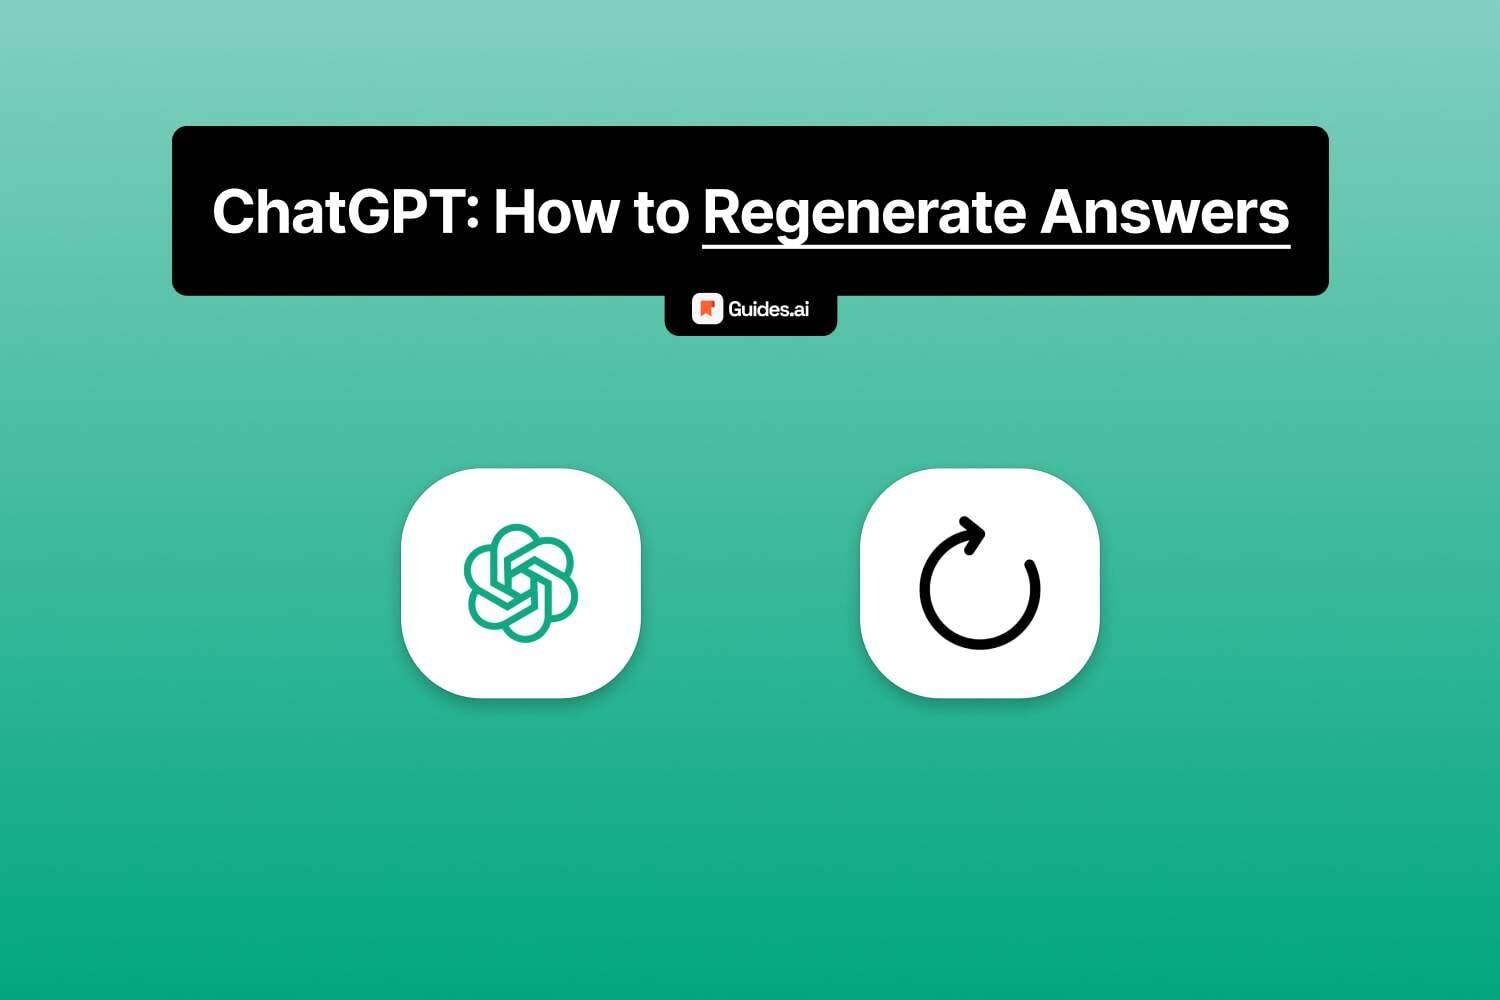 How to regenerate an answer in ChatGPT